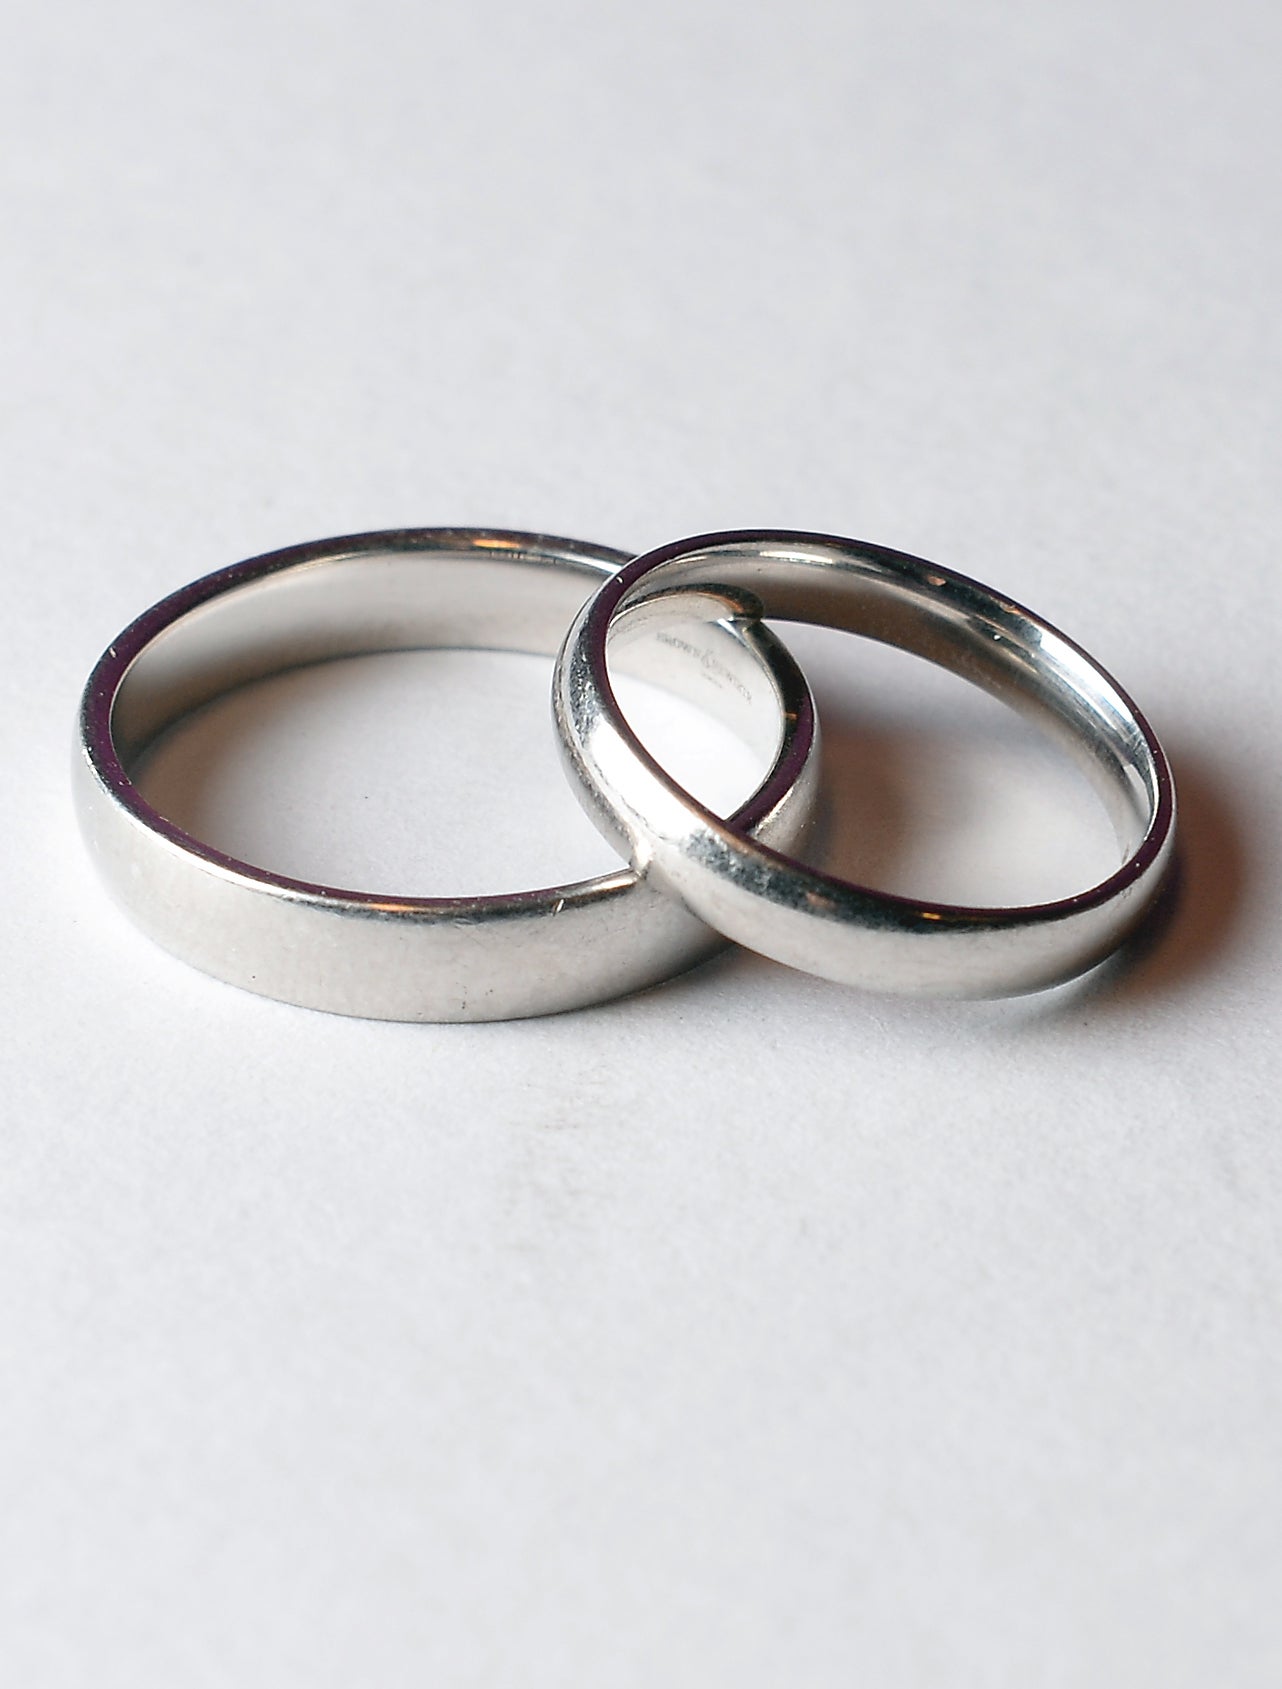 A pair of wedding rings (Anthony Devlin/PA)